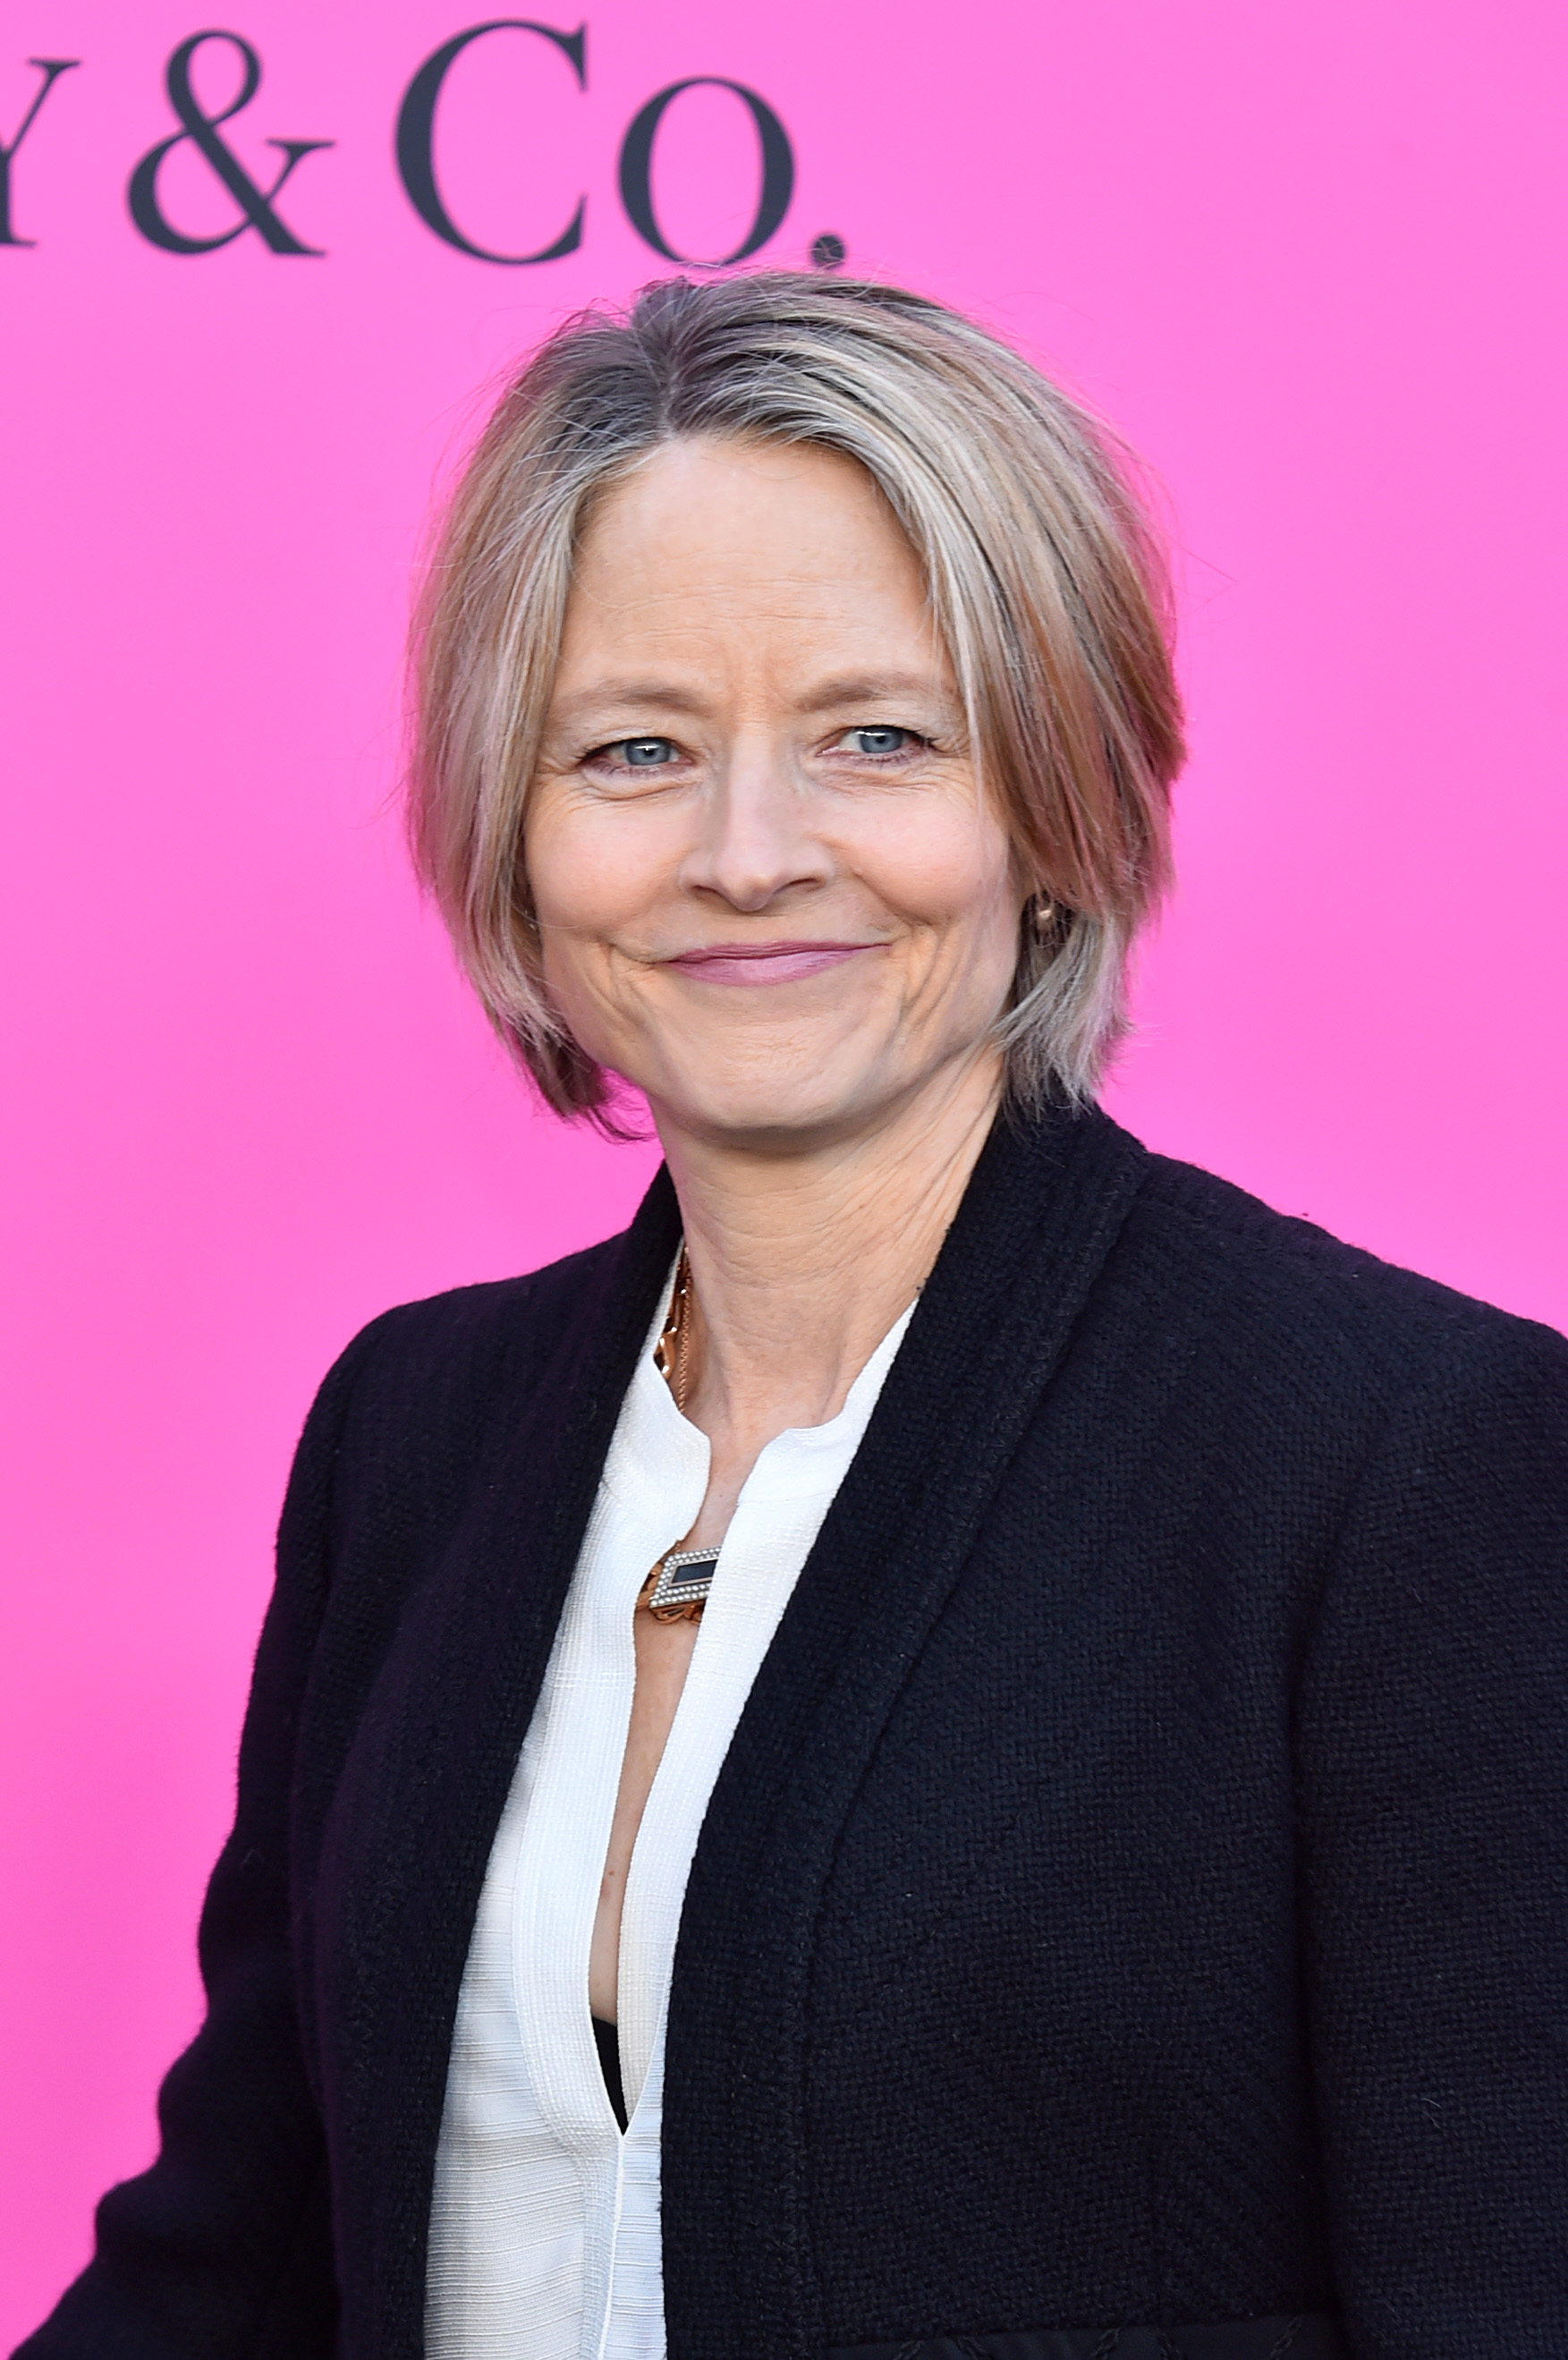 Jodie Foster at the MOCA Gala in Los Angeles, California on April 15, 2023 | Source: Getty Images